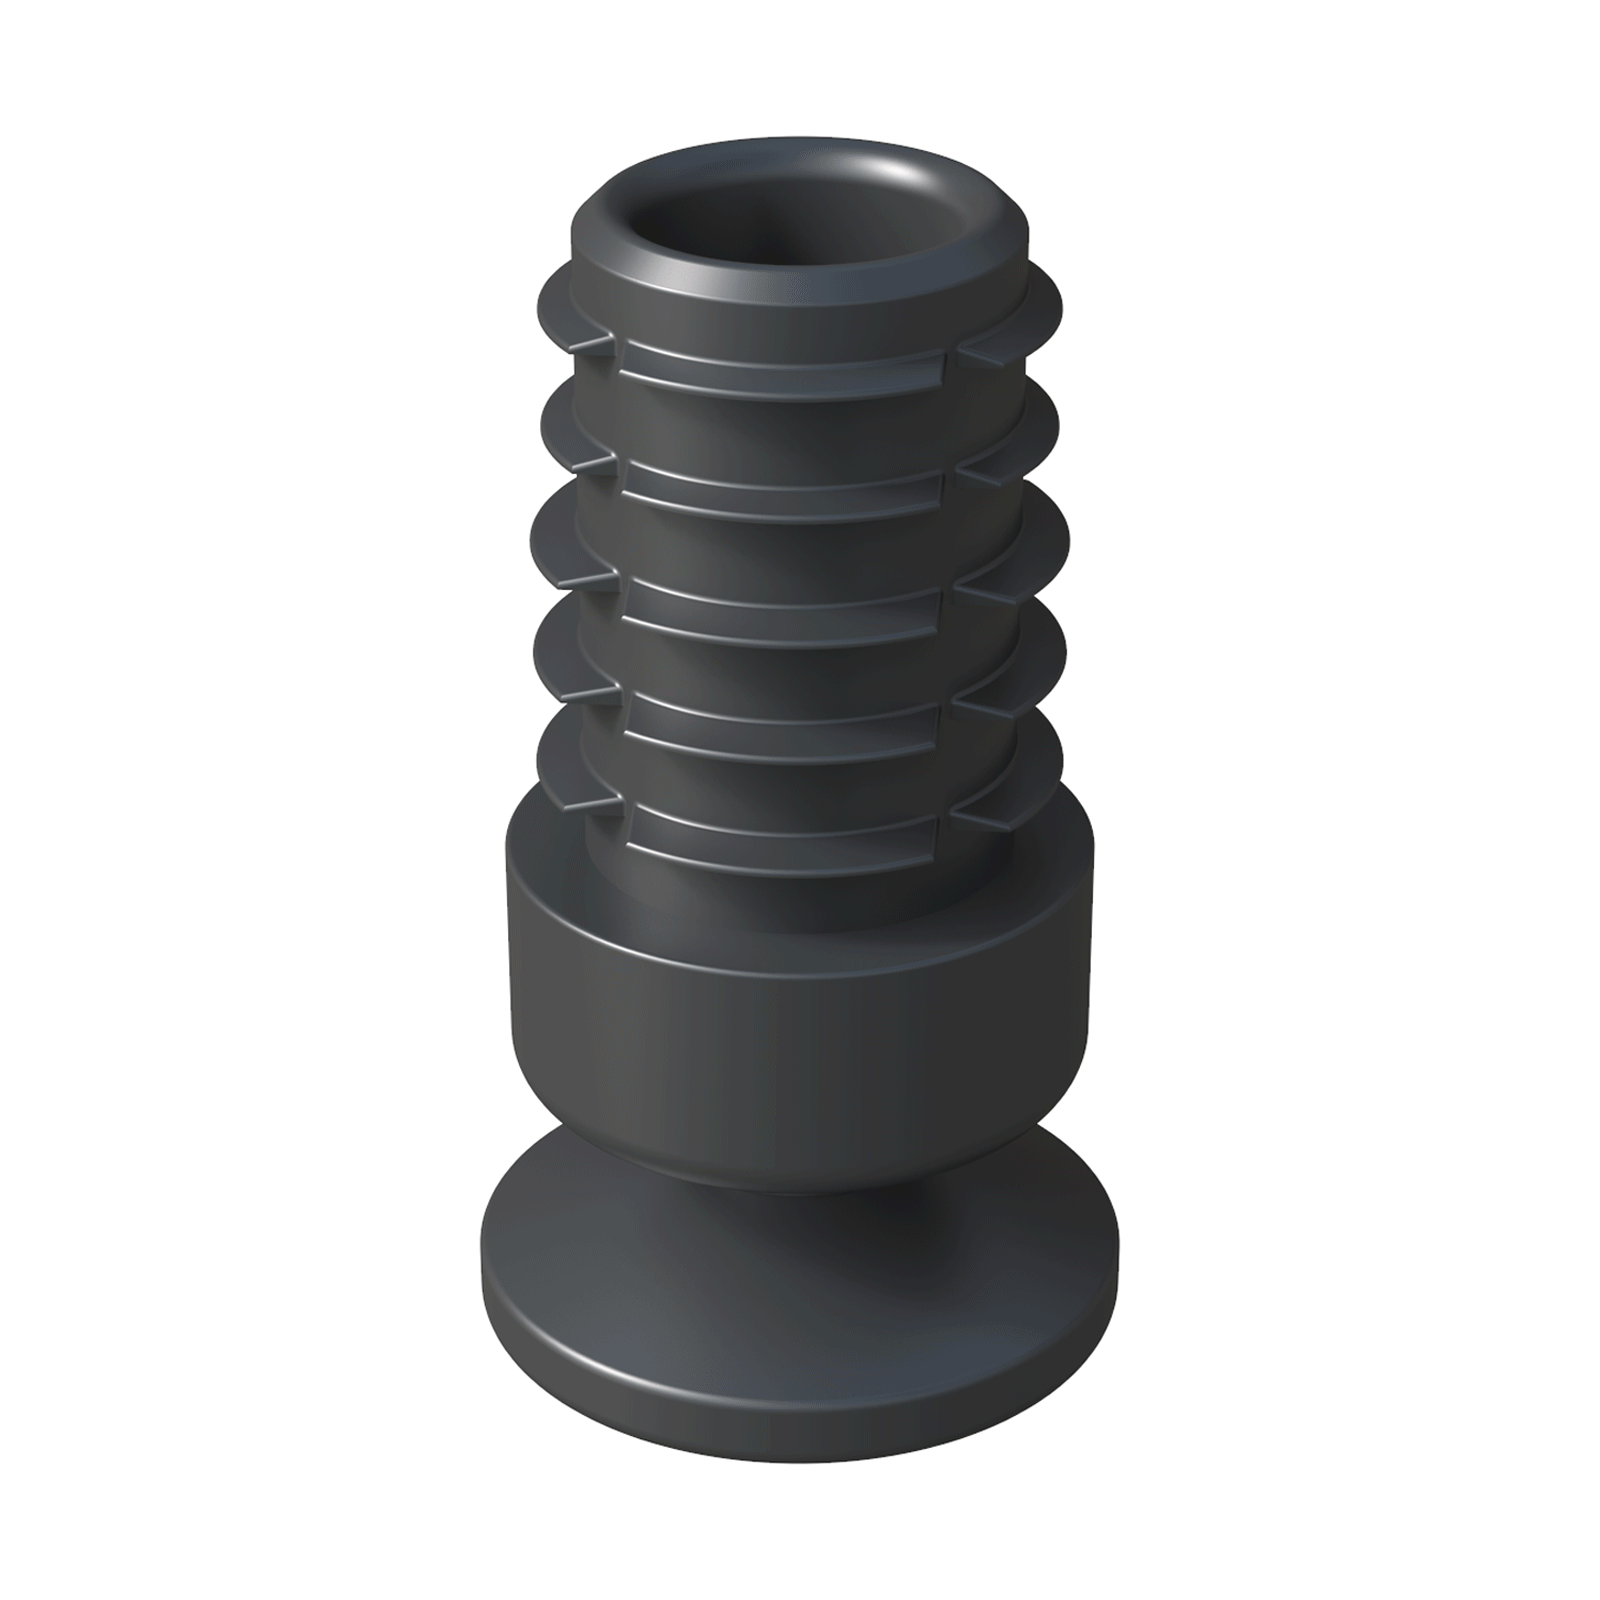 Our round base tube insert can be moved thanks to its tilt system. It can move up to 25º.